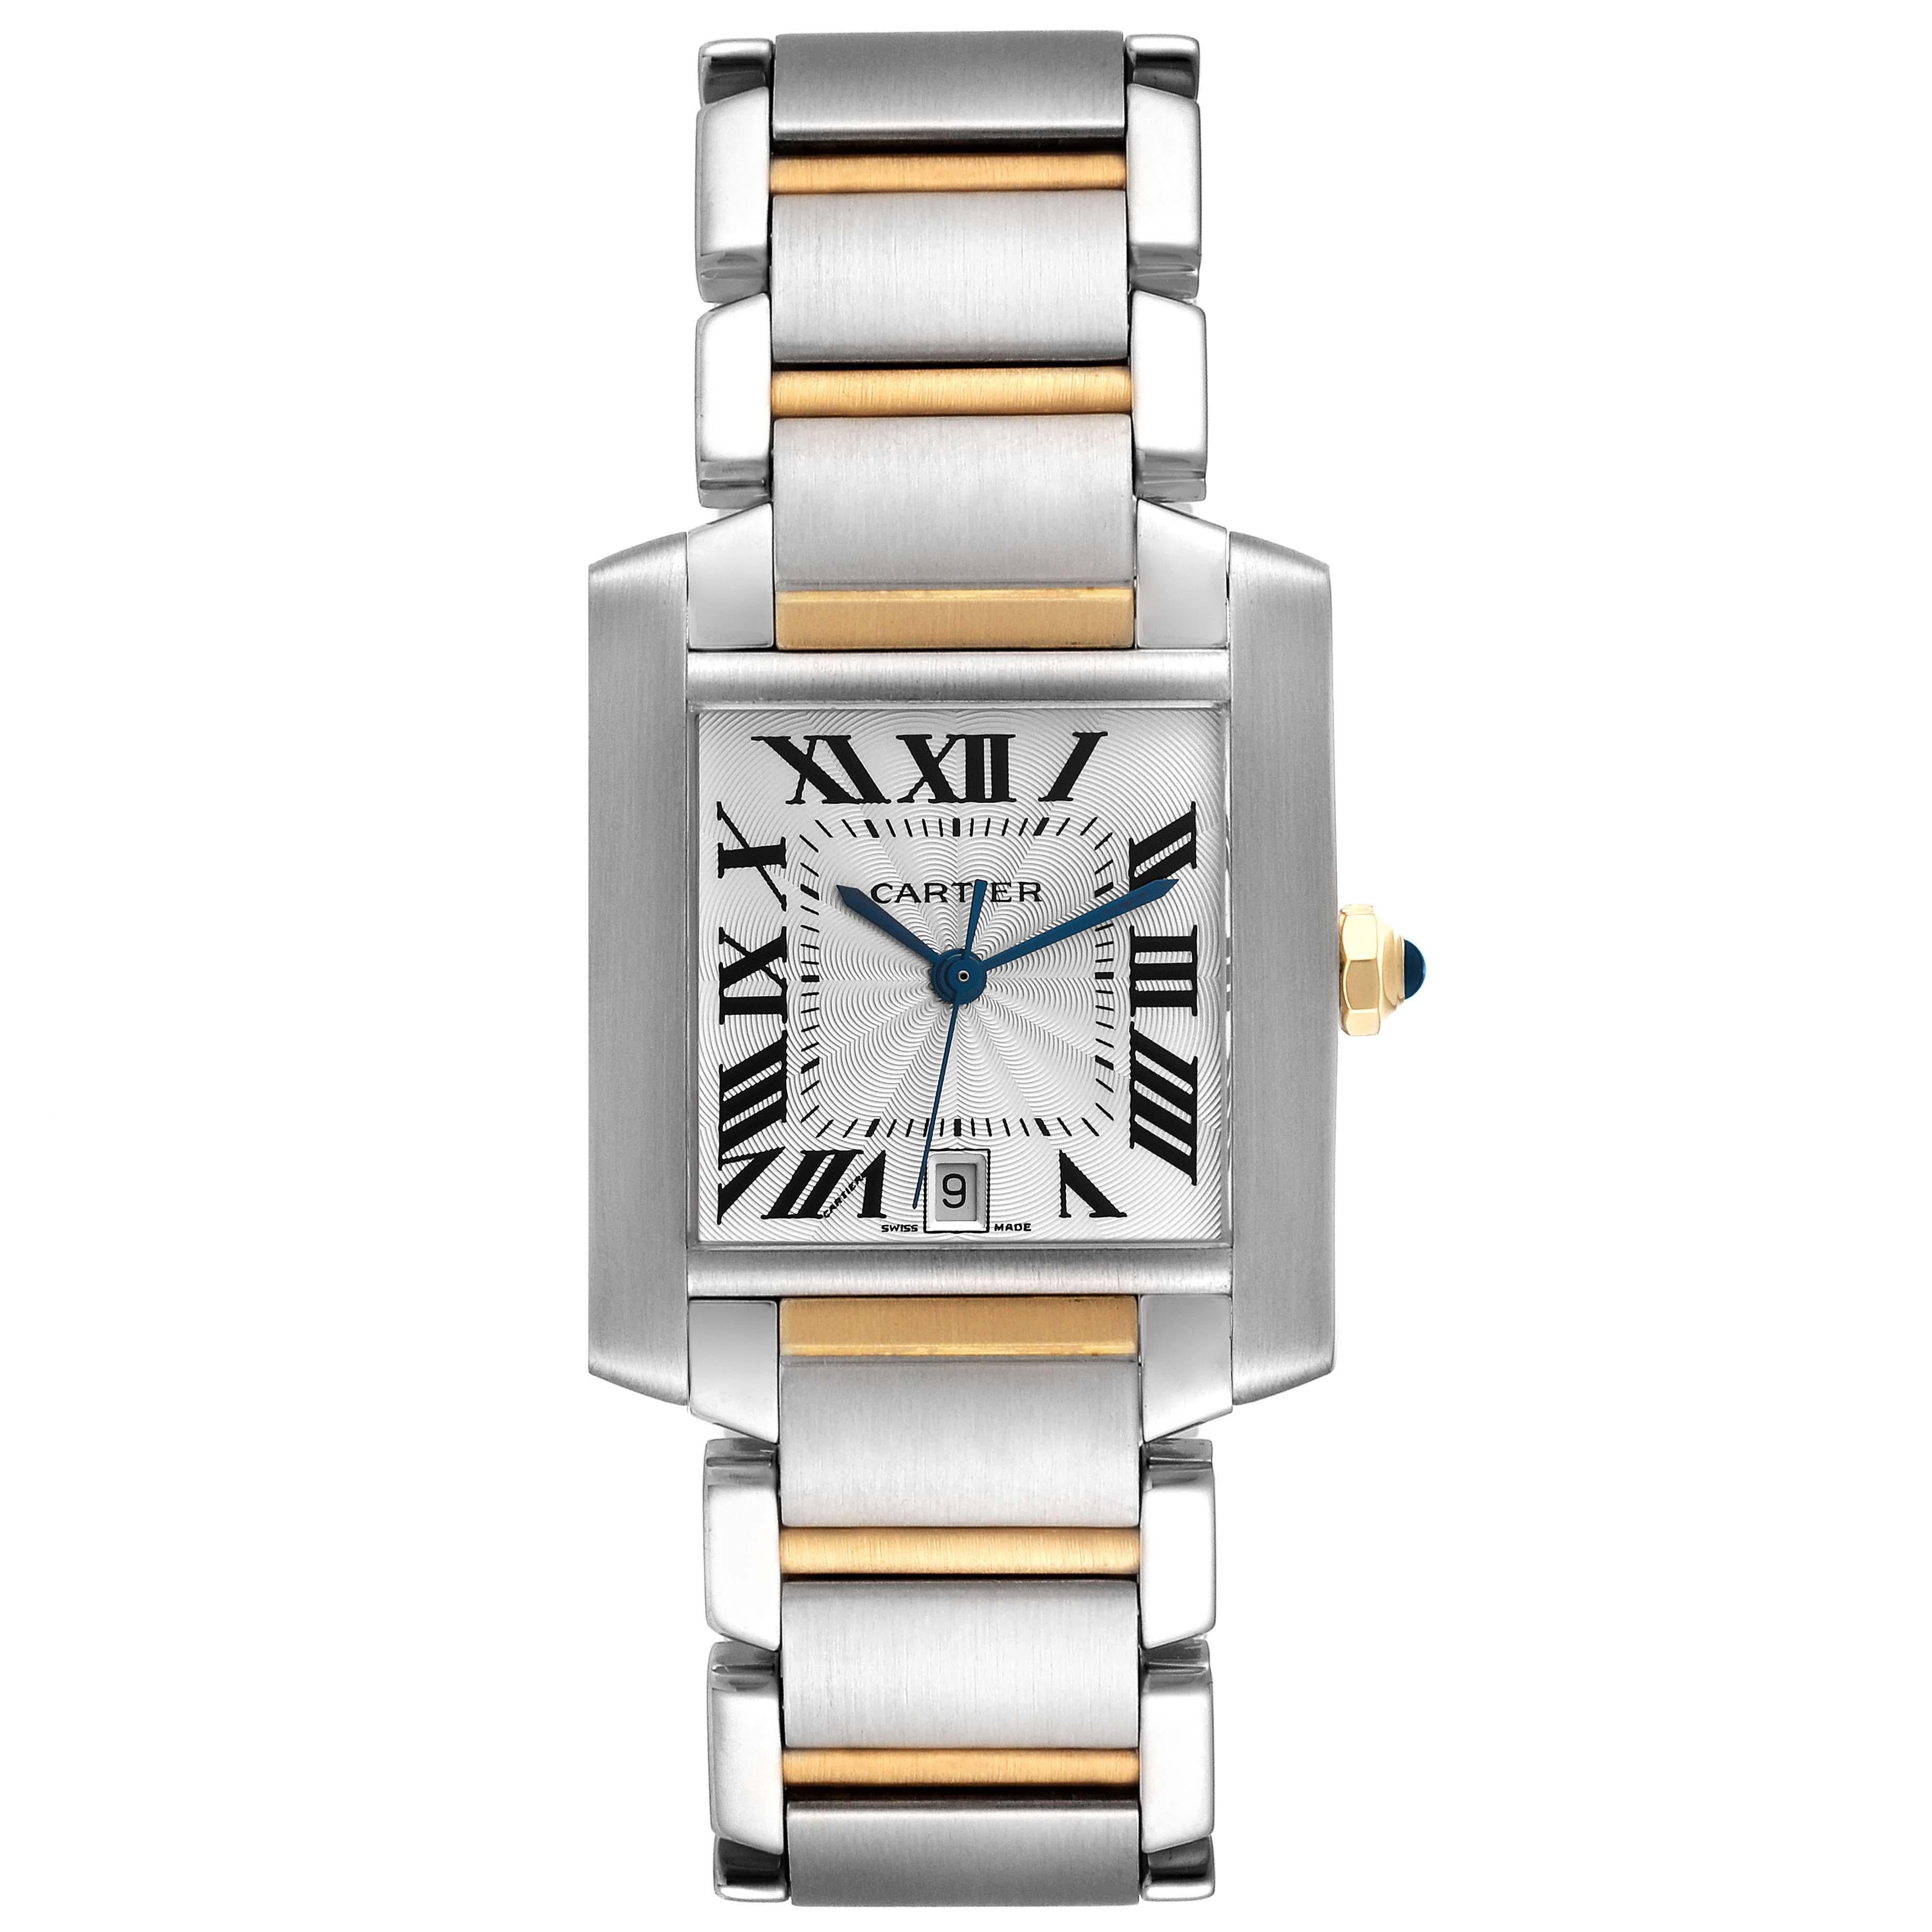 Cartier Tank Francaise Steel Yellow Gold Silver Dial Mens Watch W51005Q4. Automatic self-winding movement. Rectangular stainless steel 28.0 x 32.0 mm case. Octagonal 18K yellow gold crown set with a blue spinel cabochon. . Scratch resistant sapphire